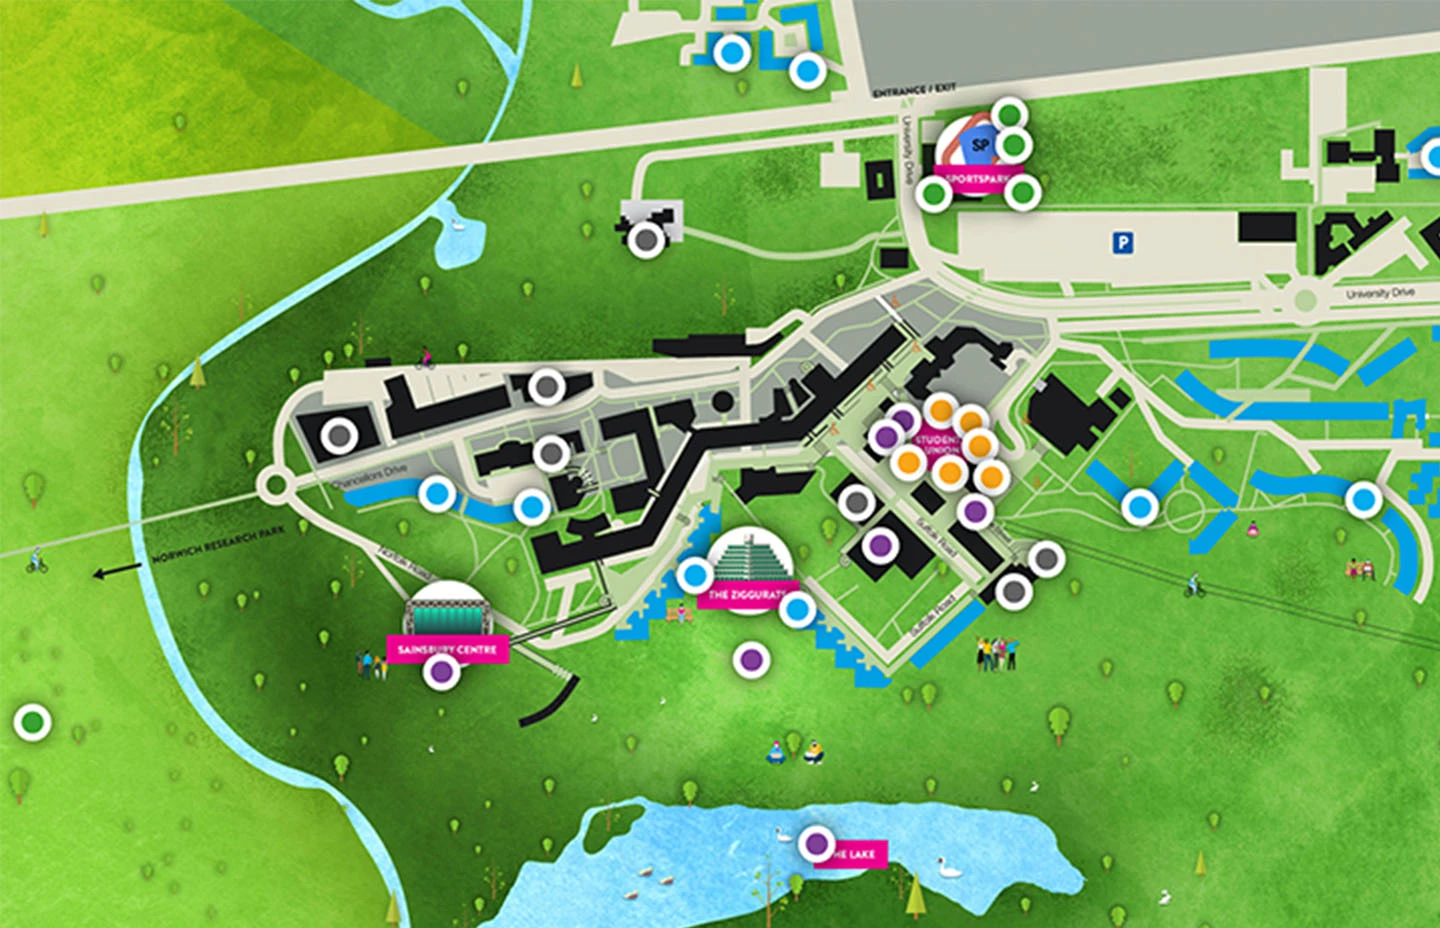 Stylised map of University of East Anglia campus from a birds eye view